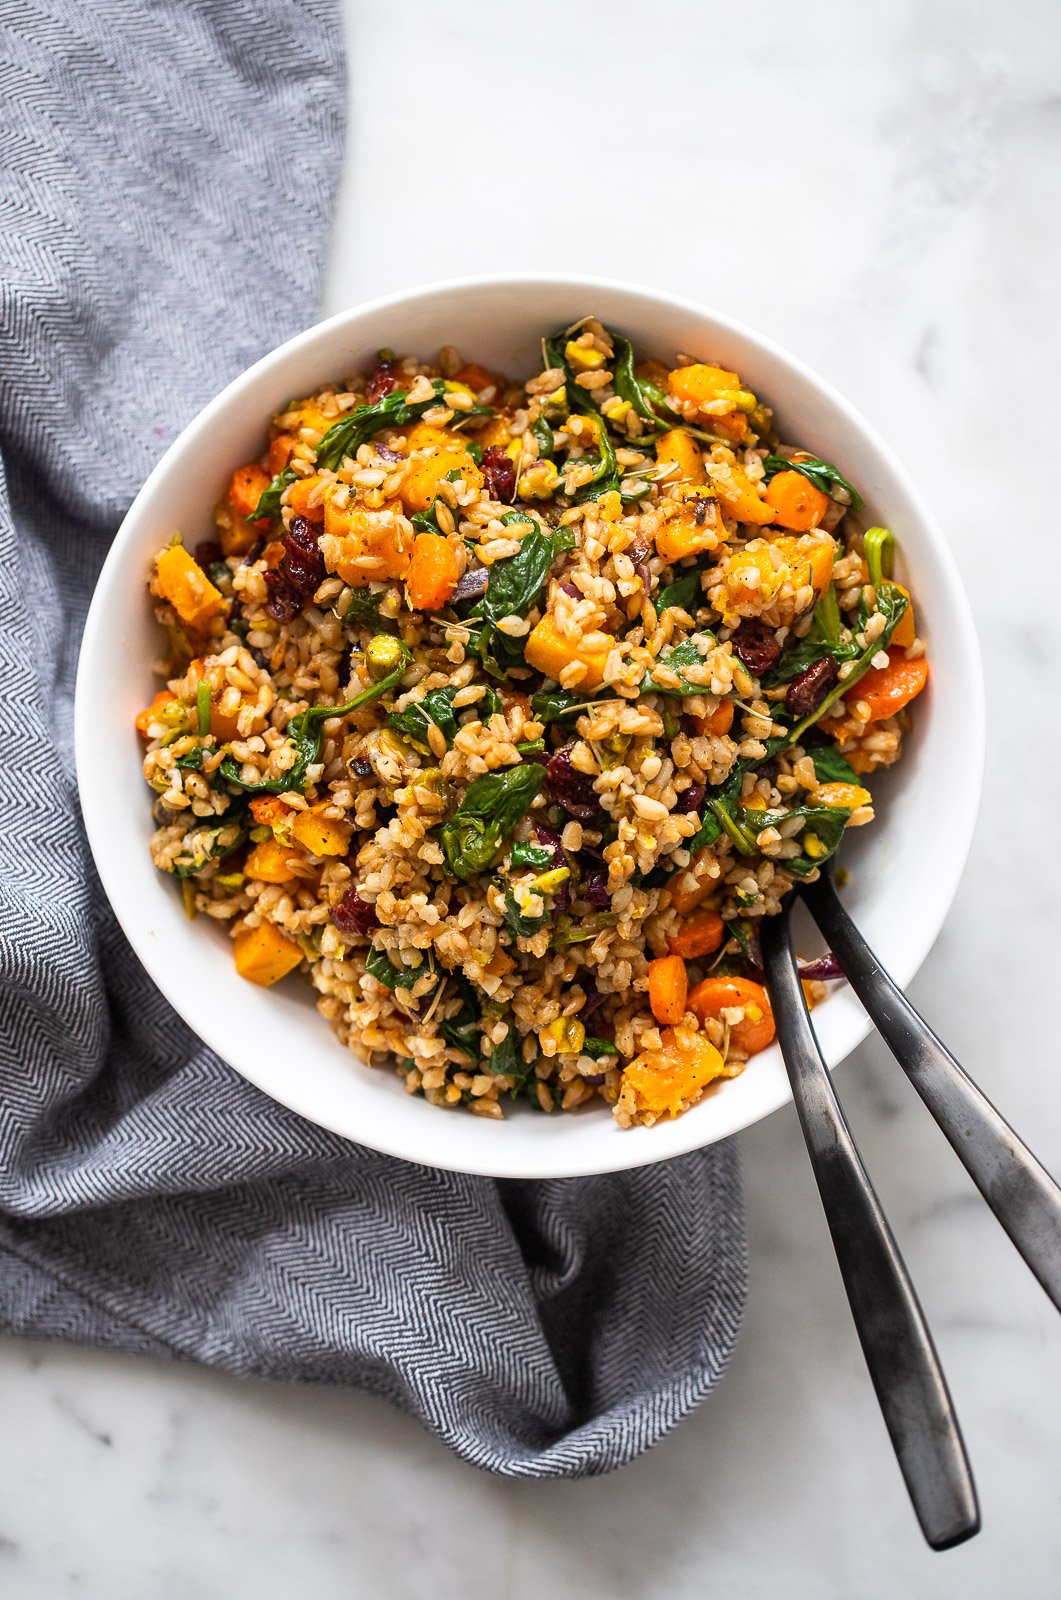 warm Farro Salad with roasted vegetables